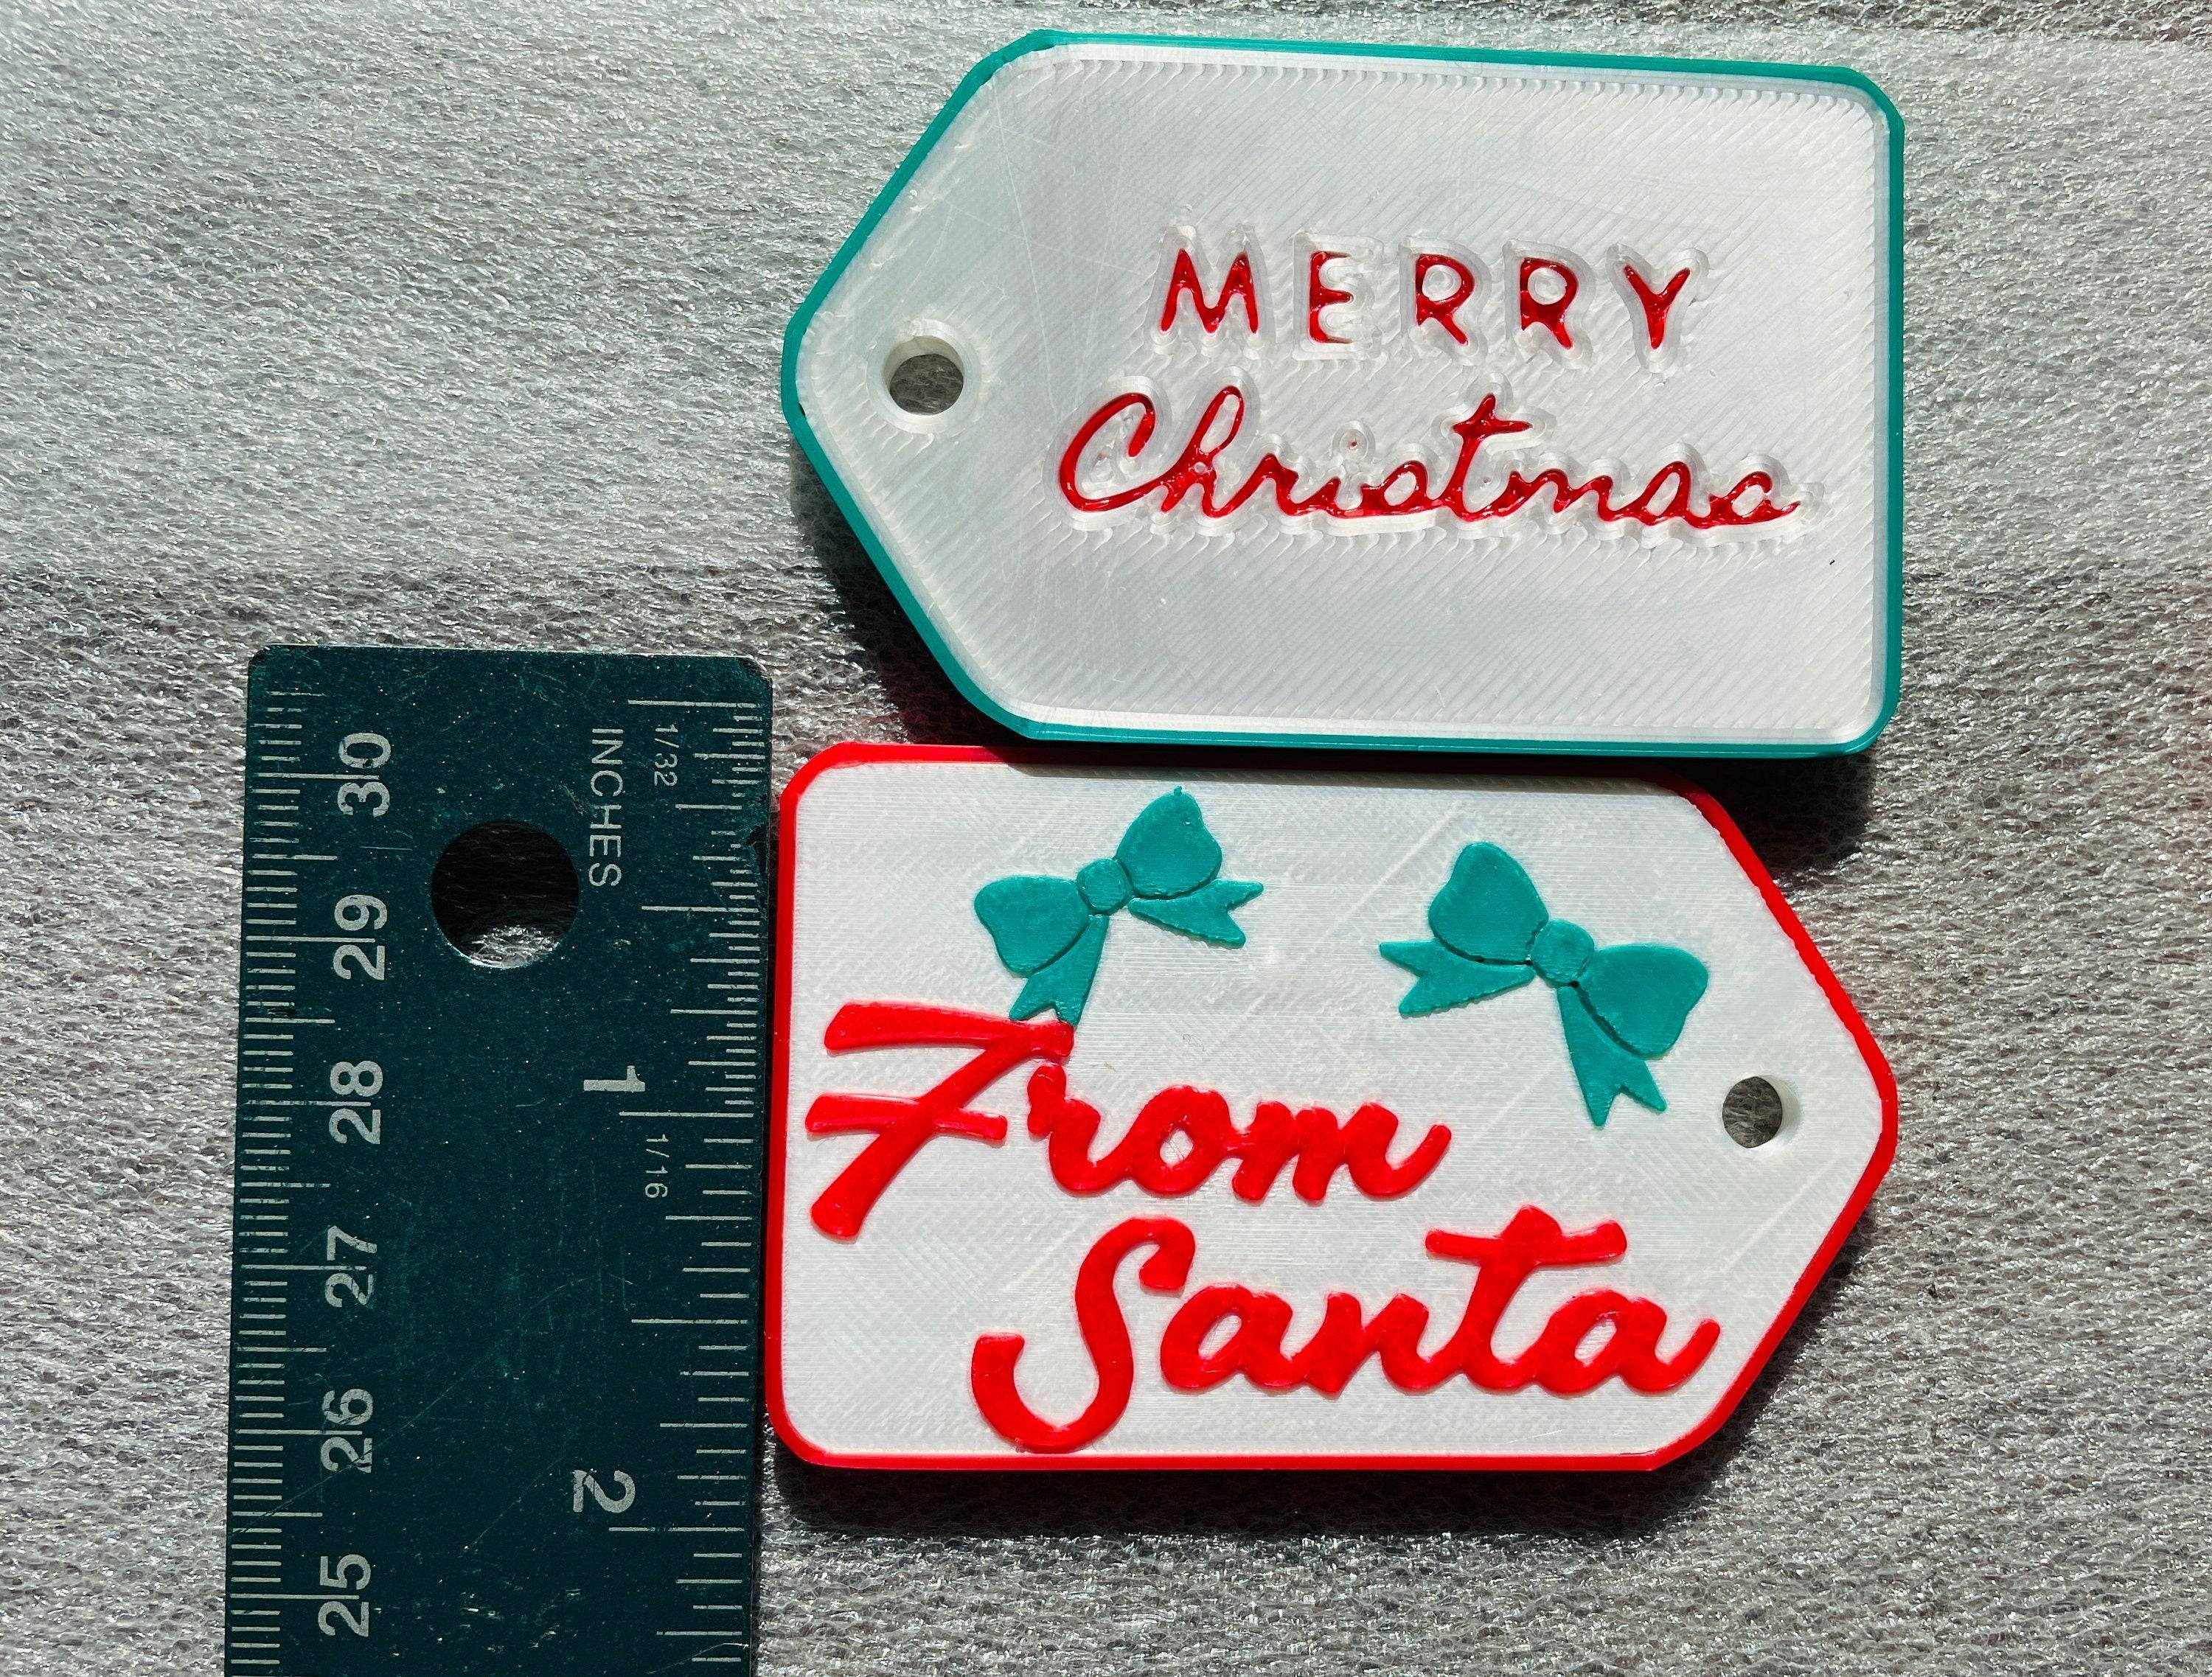 Charming, Reusable Gift Tags for Christmas. Make this year and Future years Special.